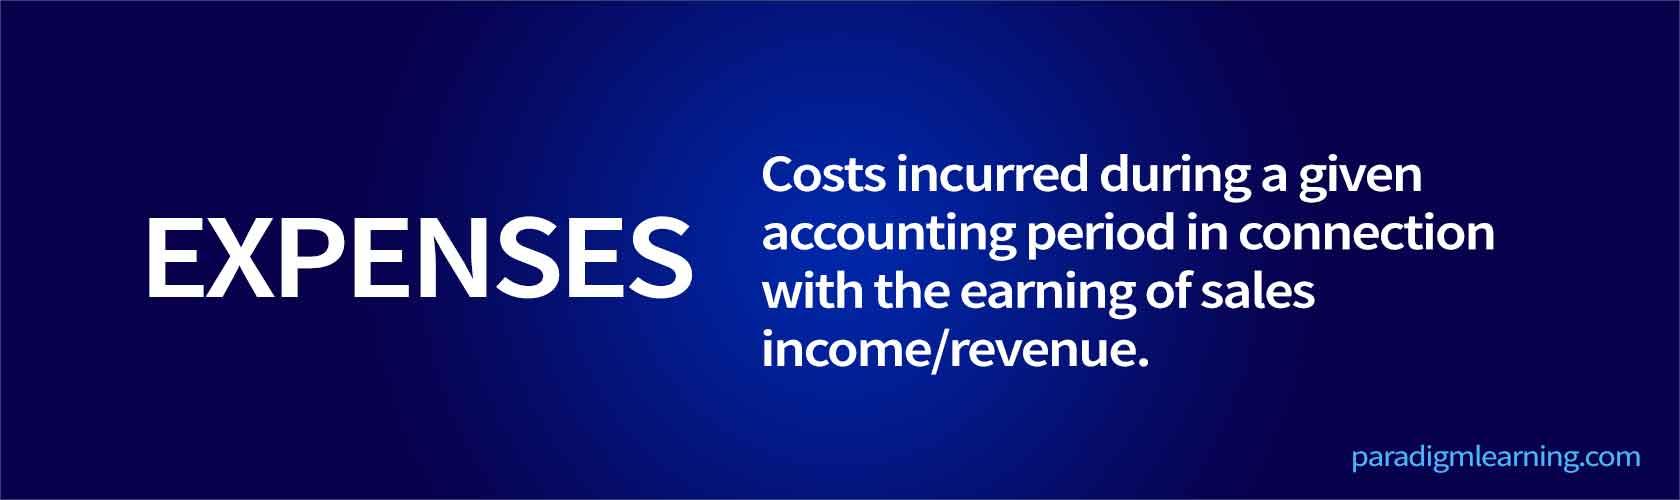 Costs incurred during a given accounting period in connection with the earning of sales income/revenue